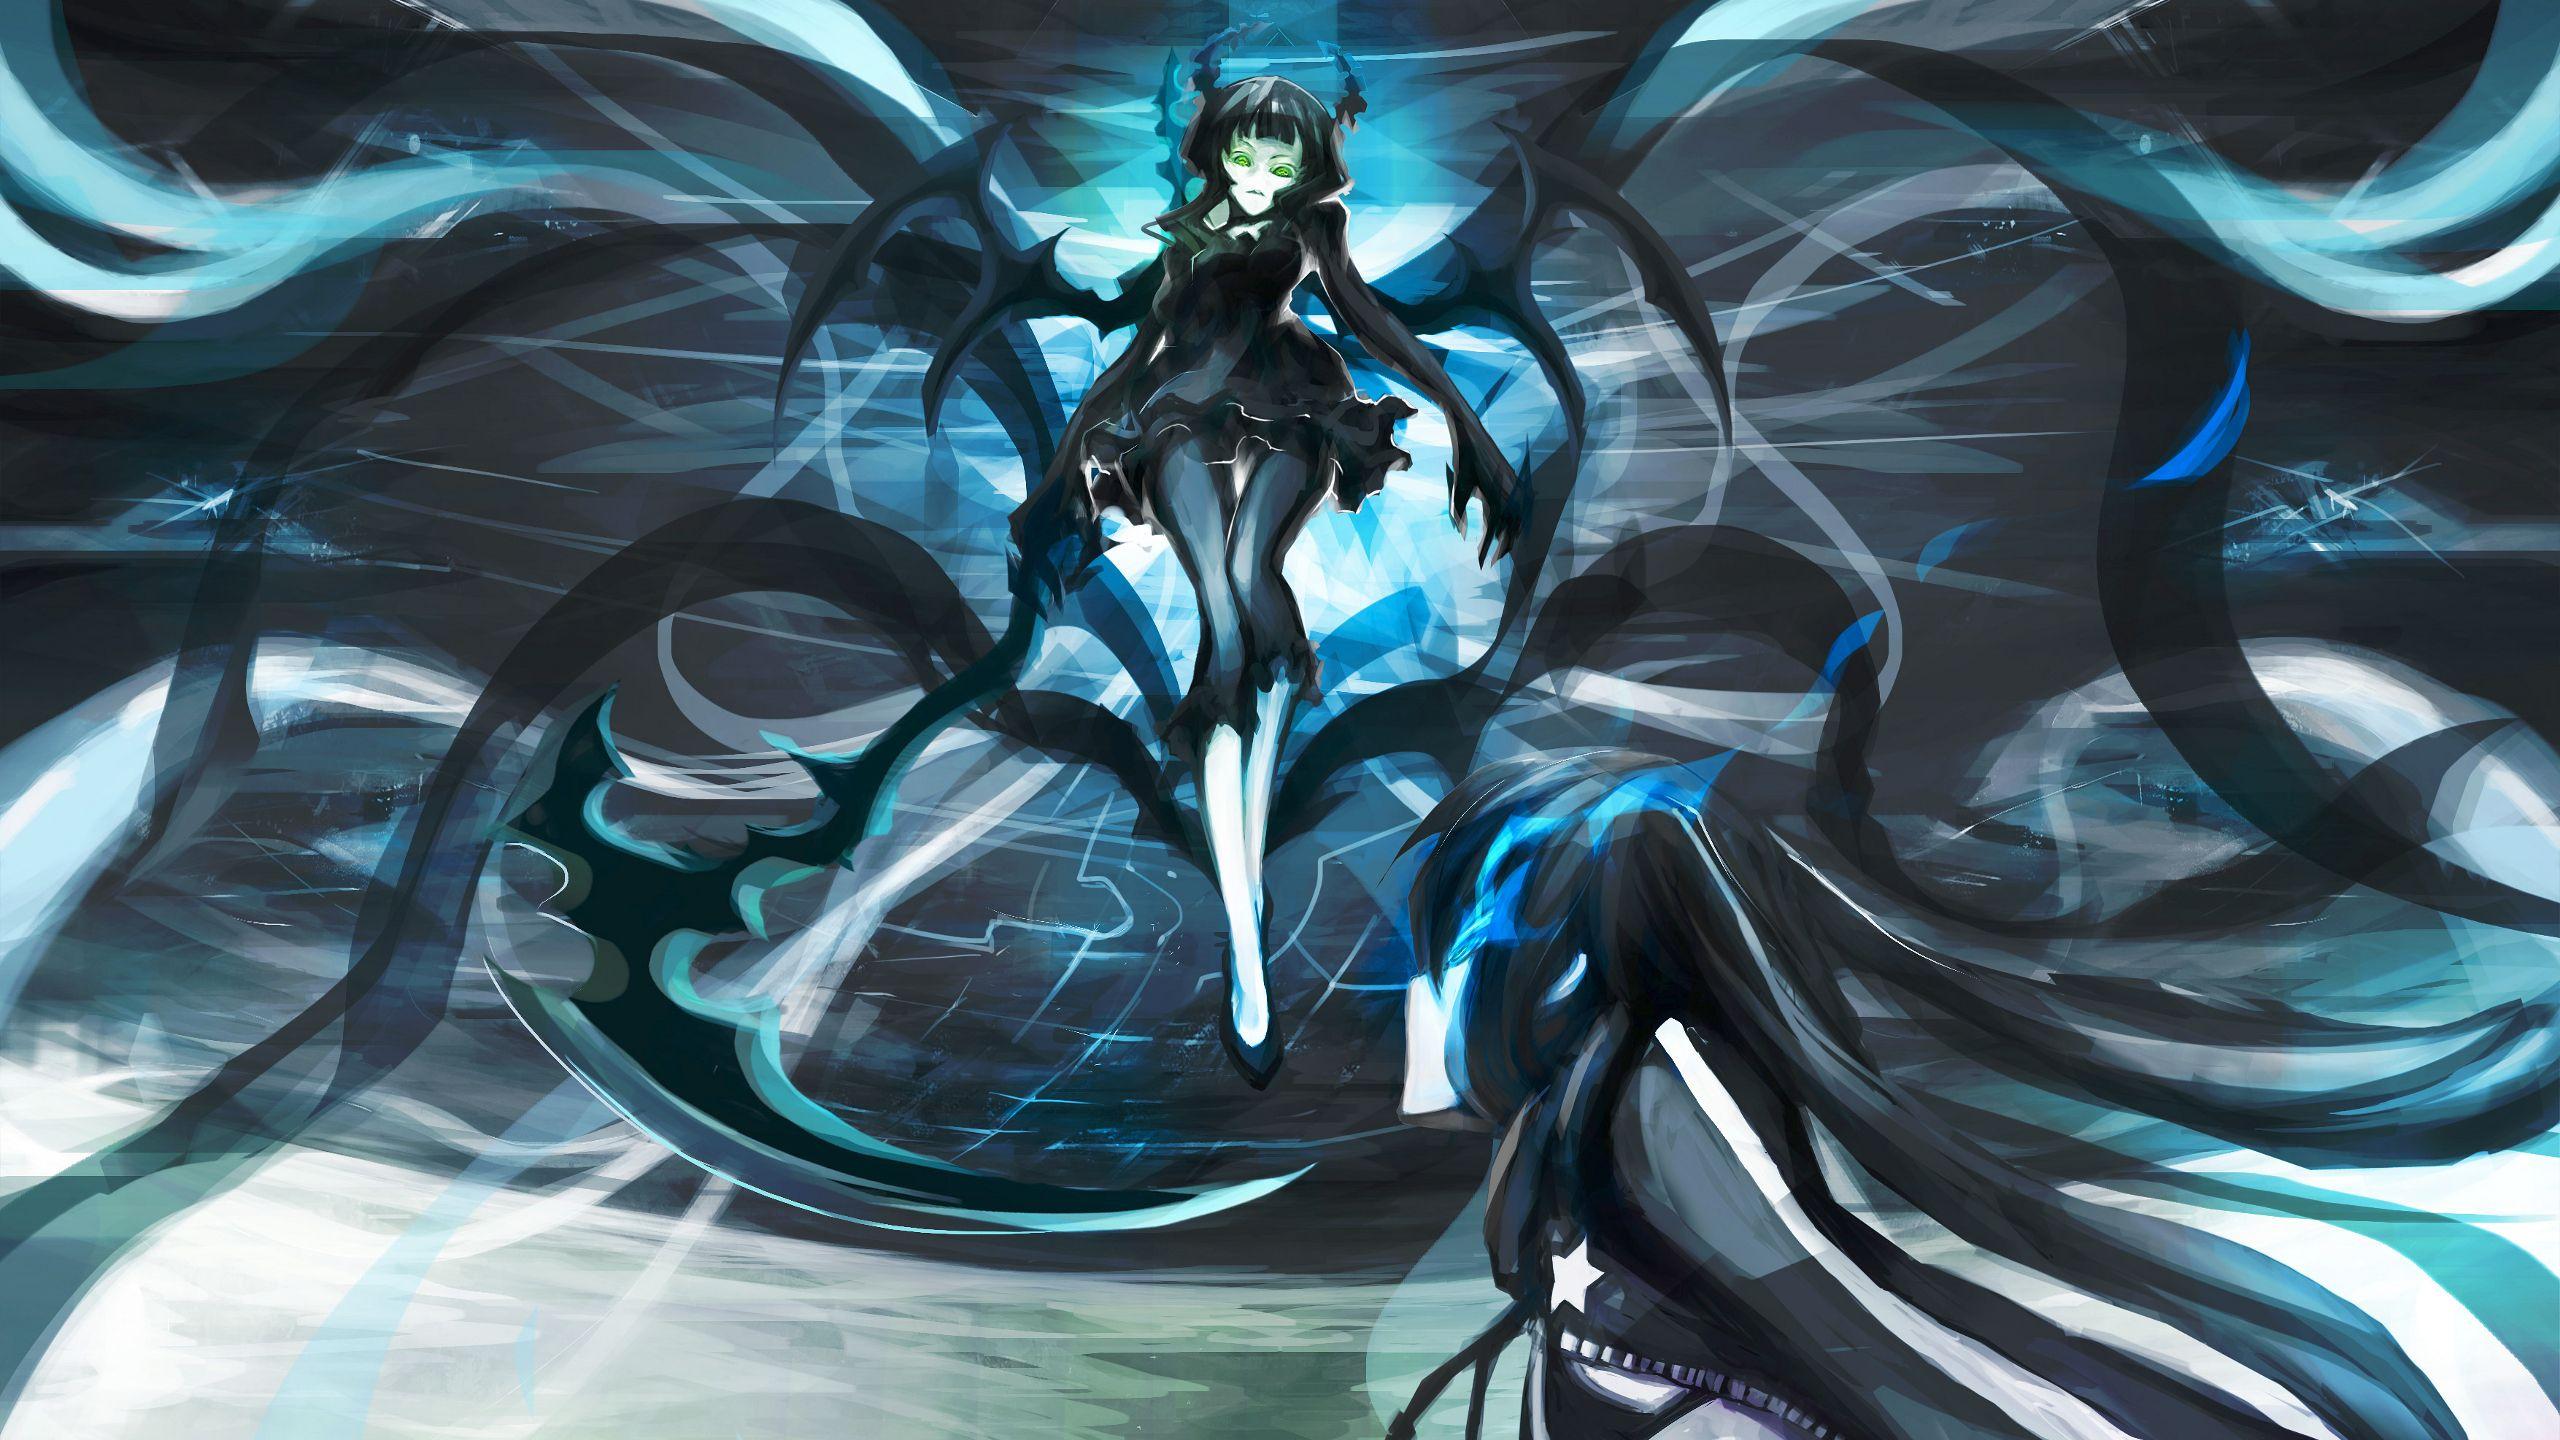 The Greatest Black Rock Shooter Quotes That Will Make You Think